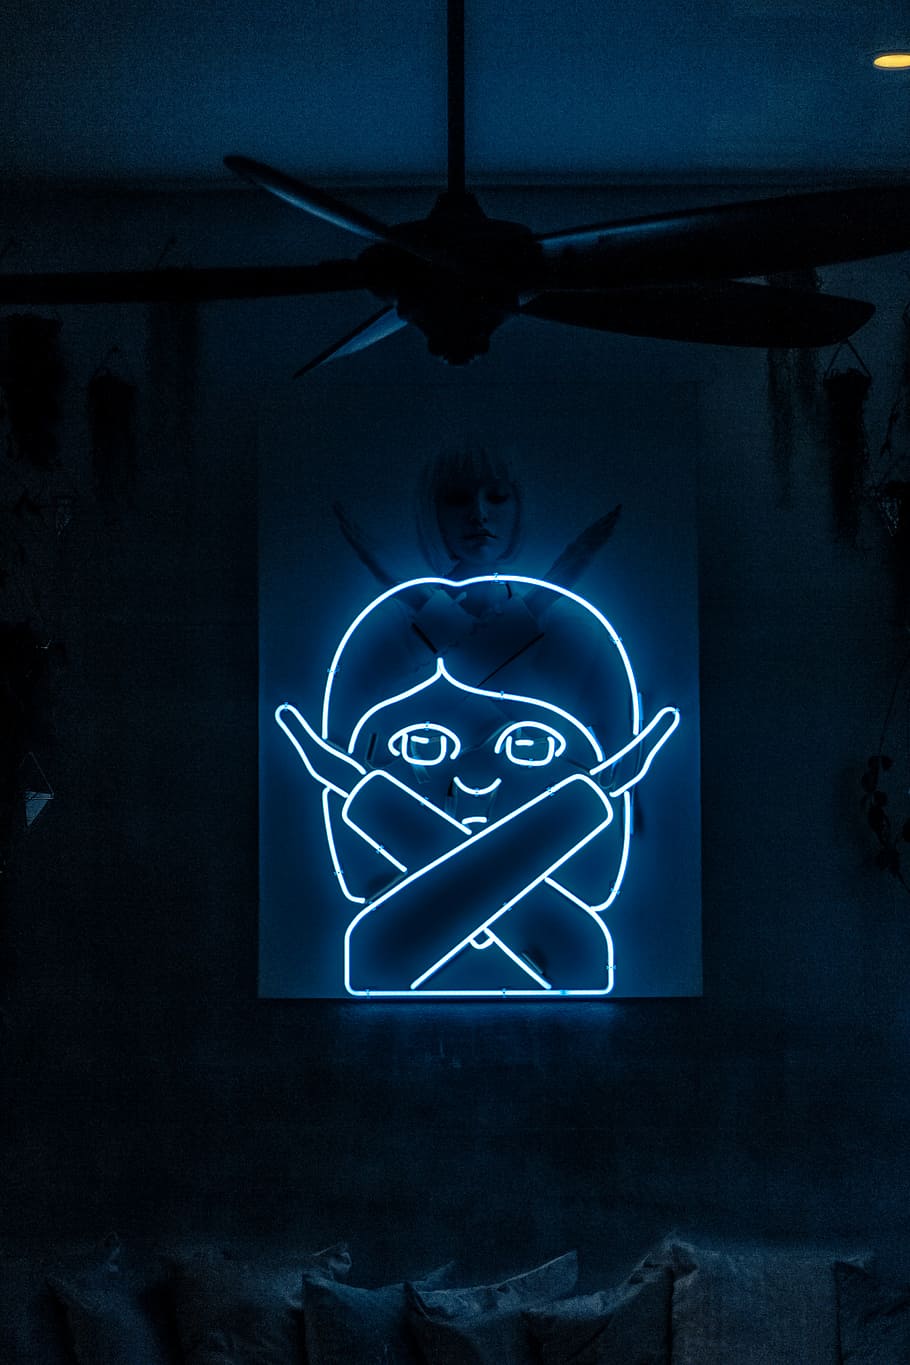 HD wallpaper: neon signage of woman crossing her both arms, female emoji neon light